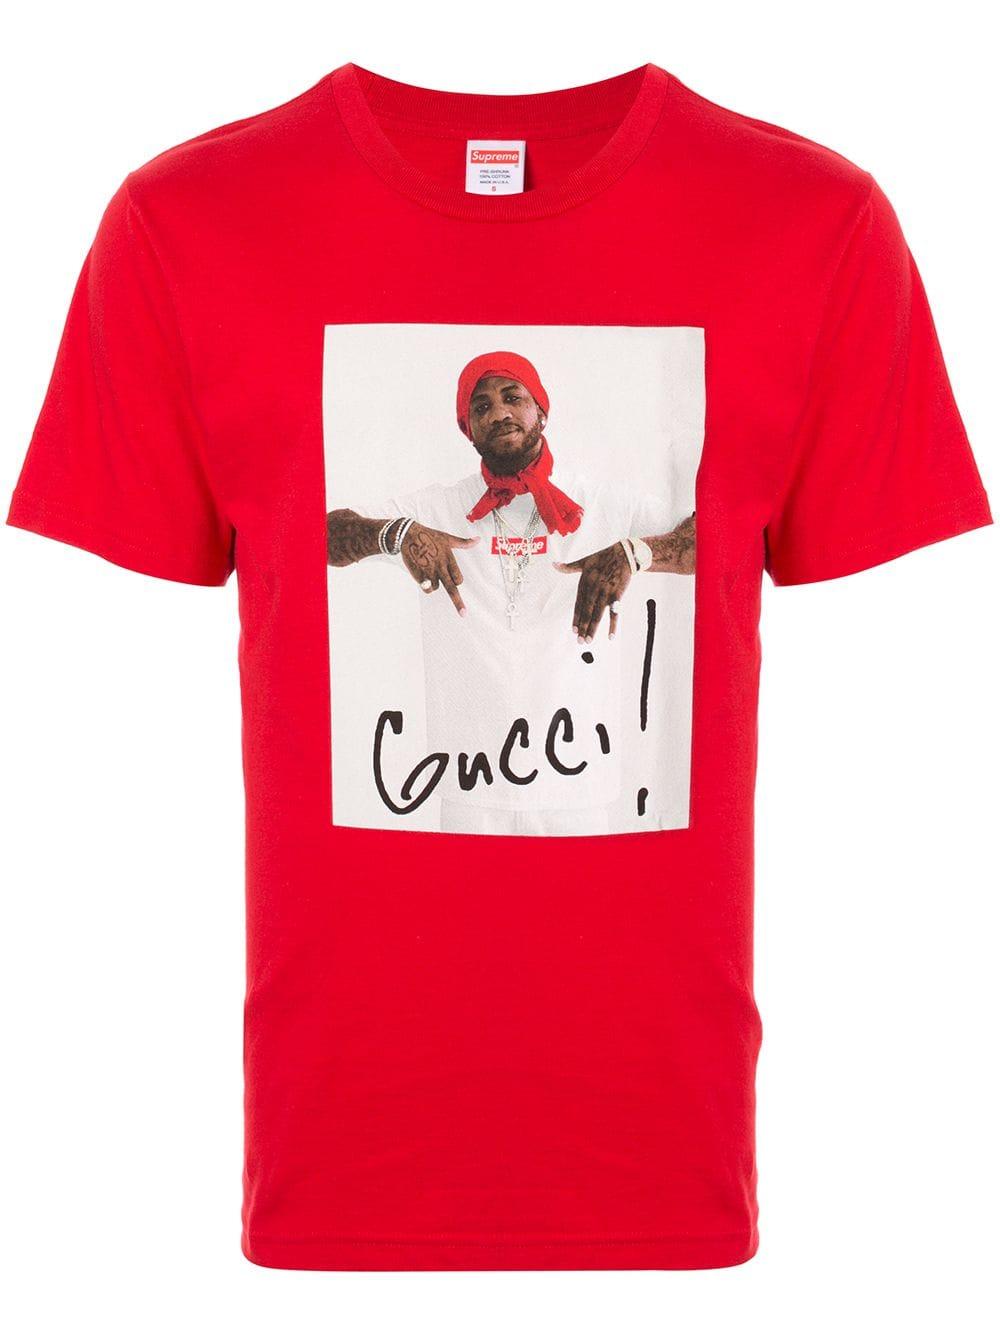 Supreme Cotton Gucci Mane T-shirt in Red for Men - Lyst